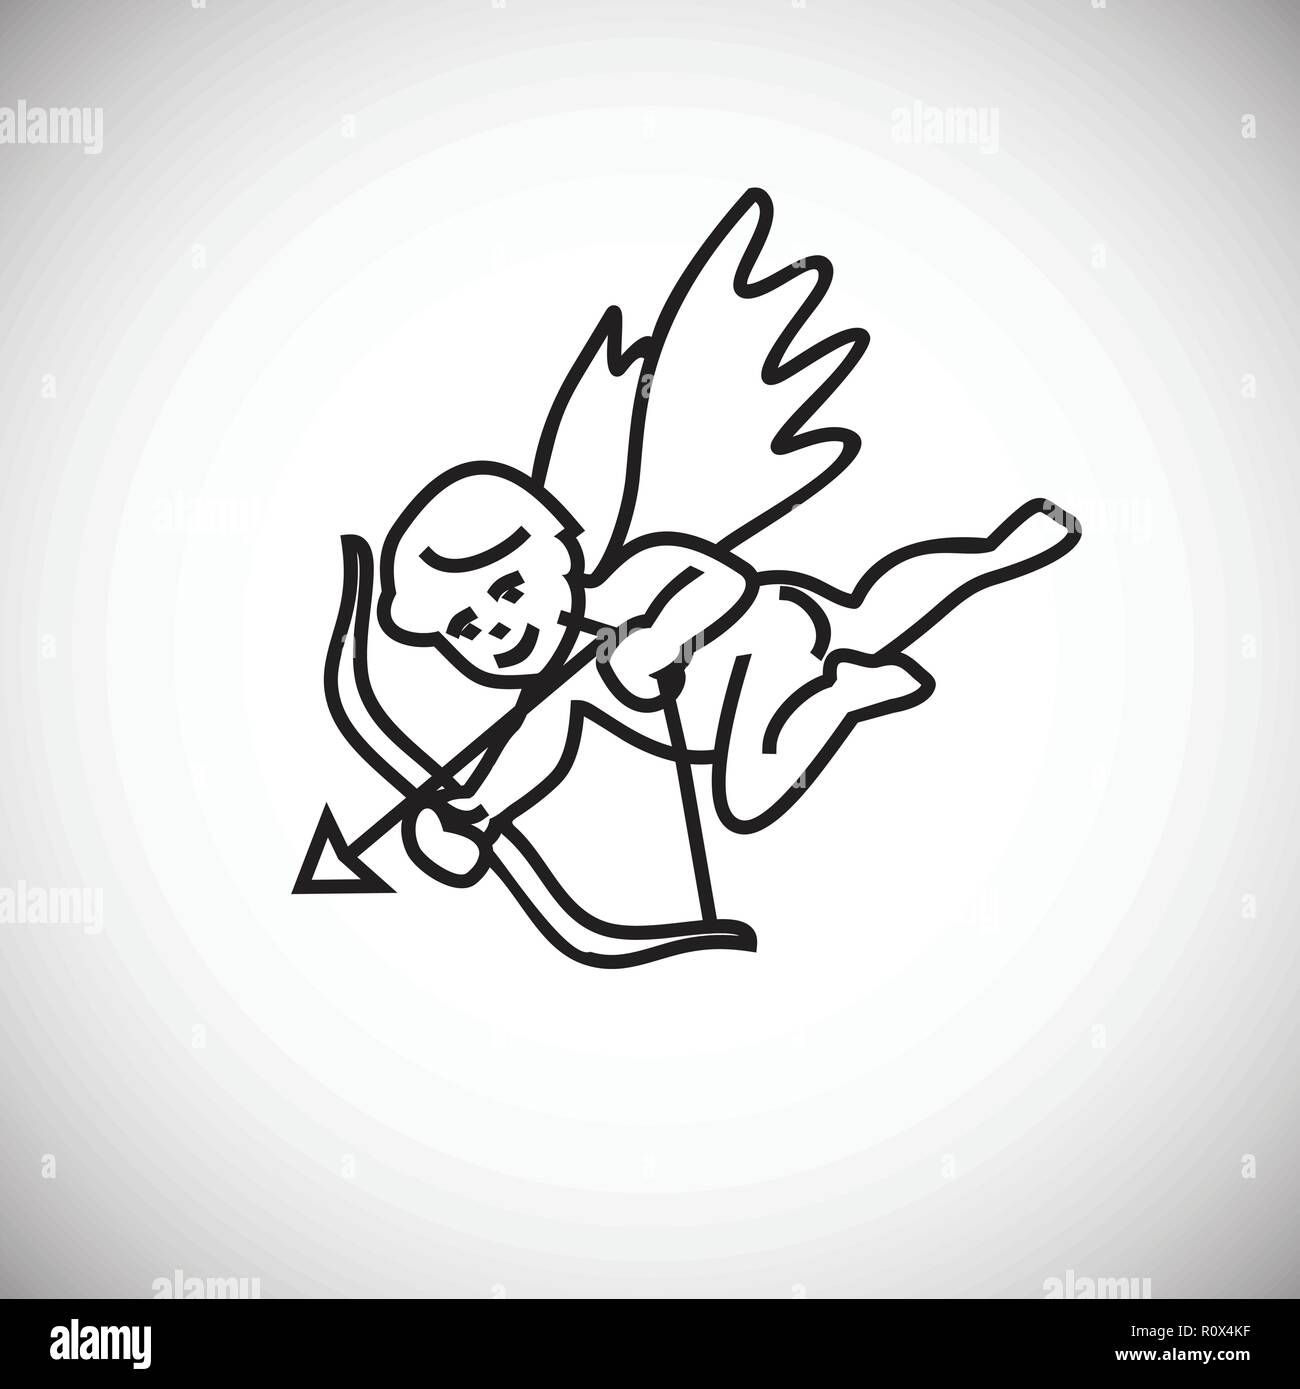 Cupid thin line on white background Stock Vector